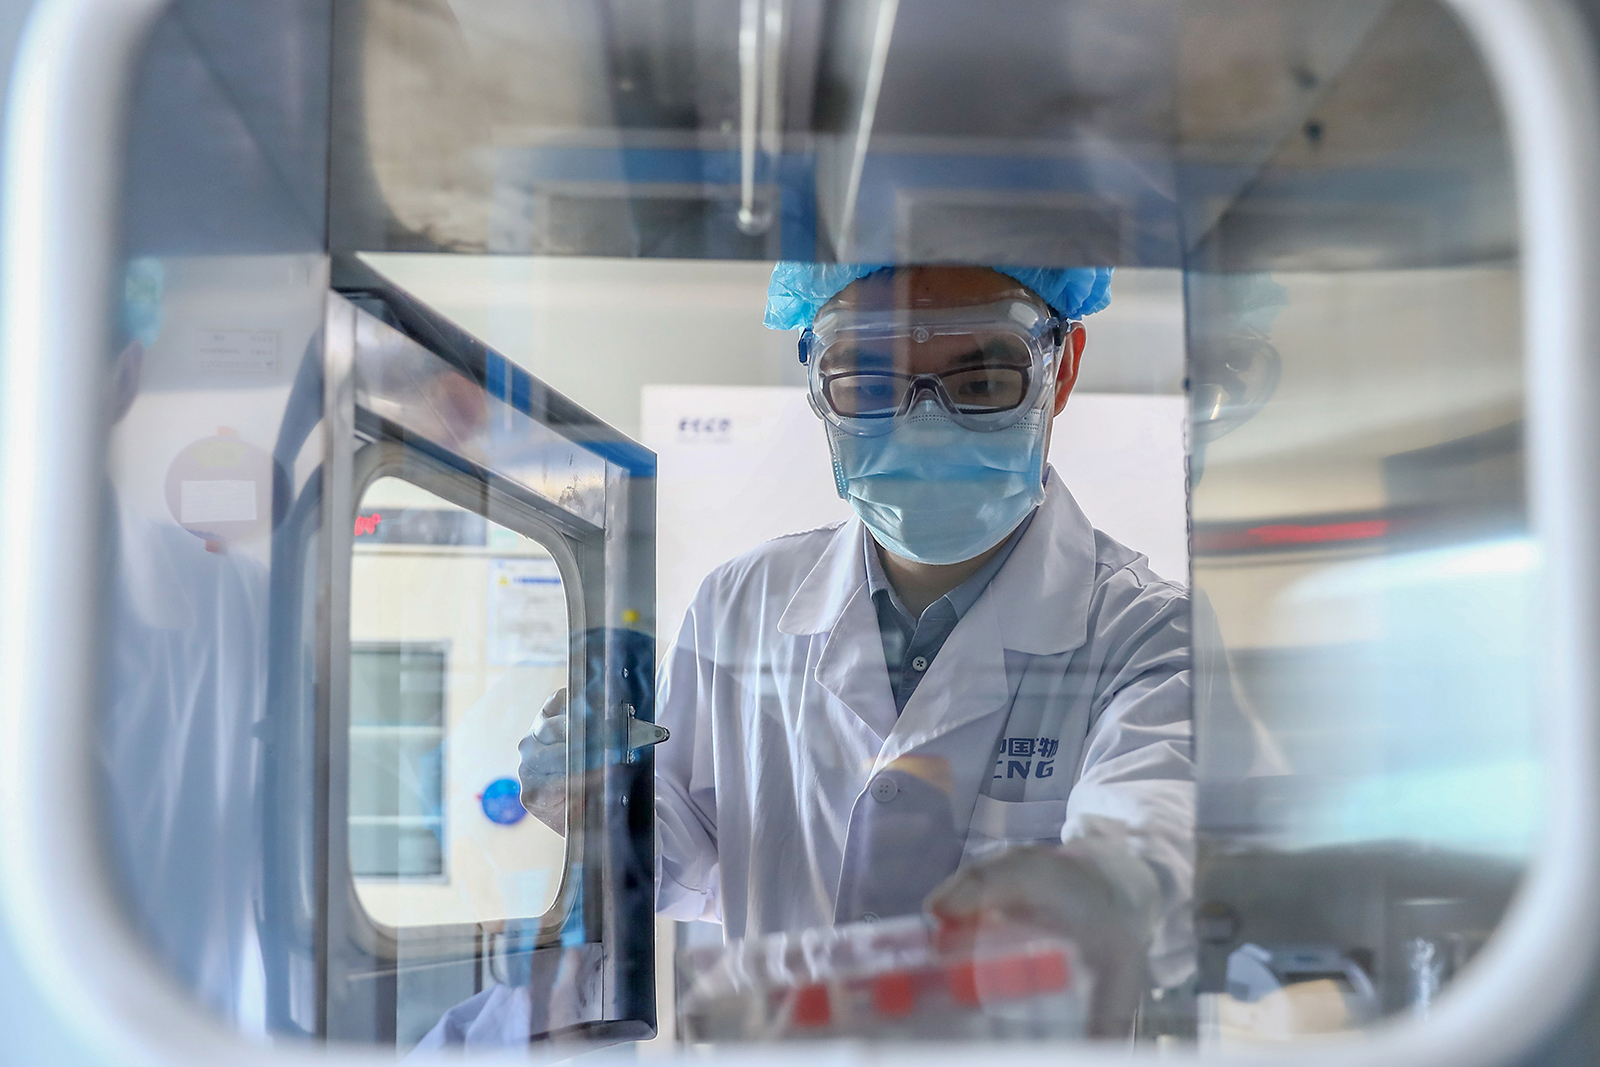 A staff member takes out samples of the Covid-19 inactivated vaccine at a vaccine production plant of China National Pharmaceutical Group Sinopharm, in Beijing, on April 11.